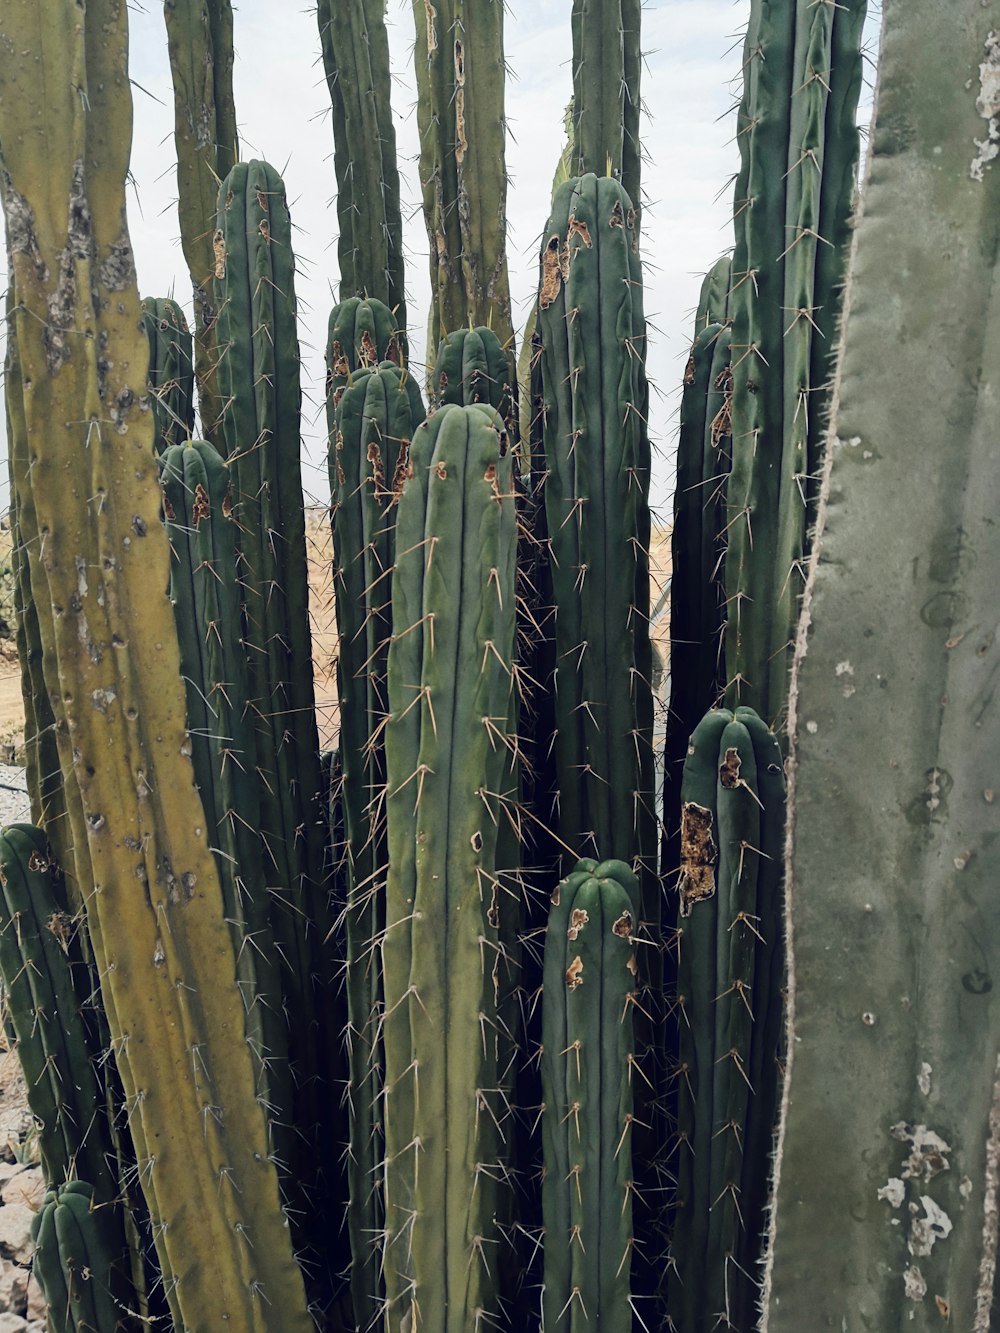 a group of cactus plants in a field